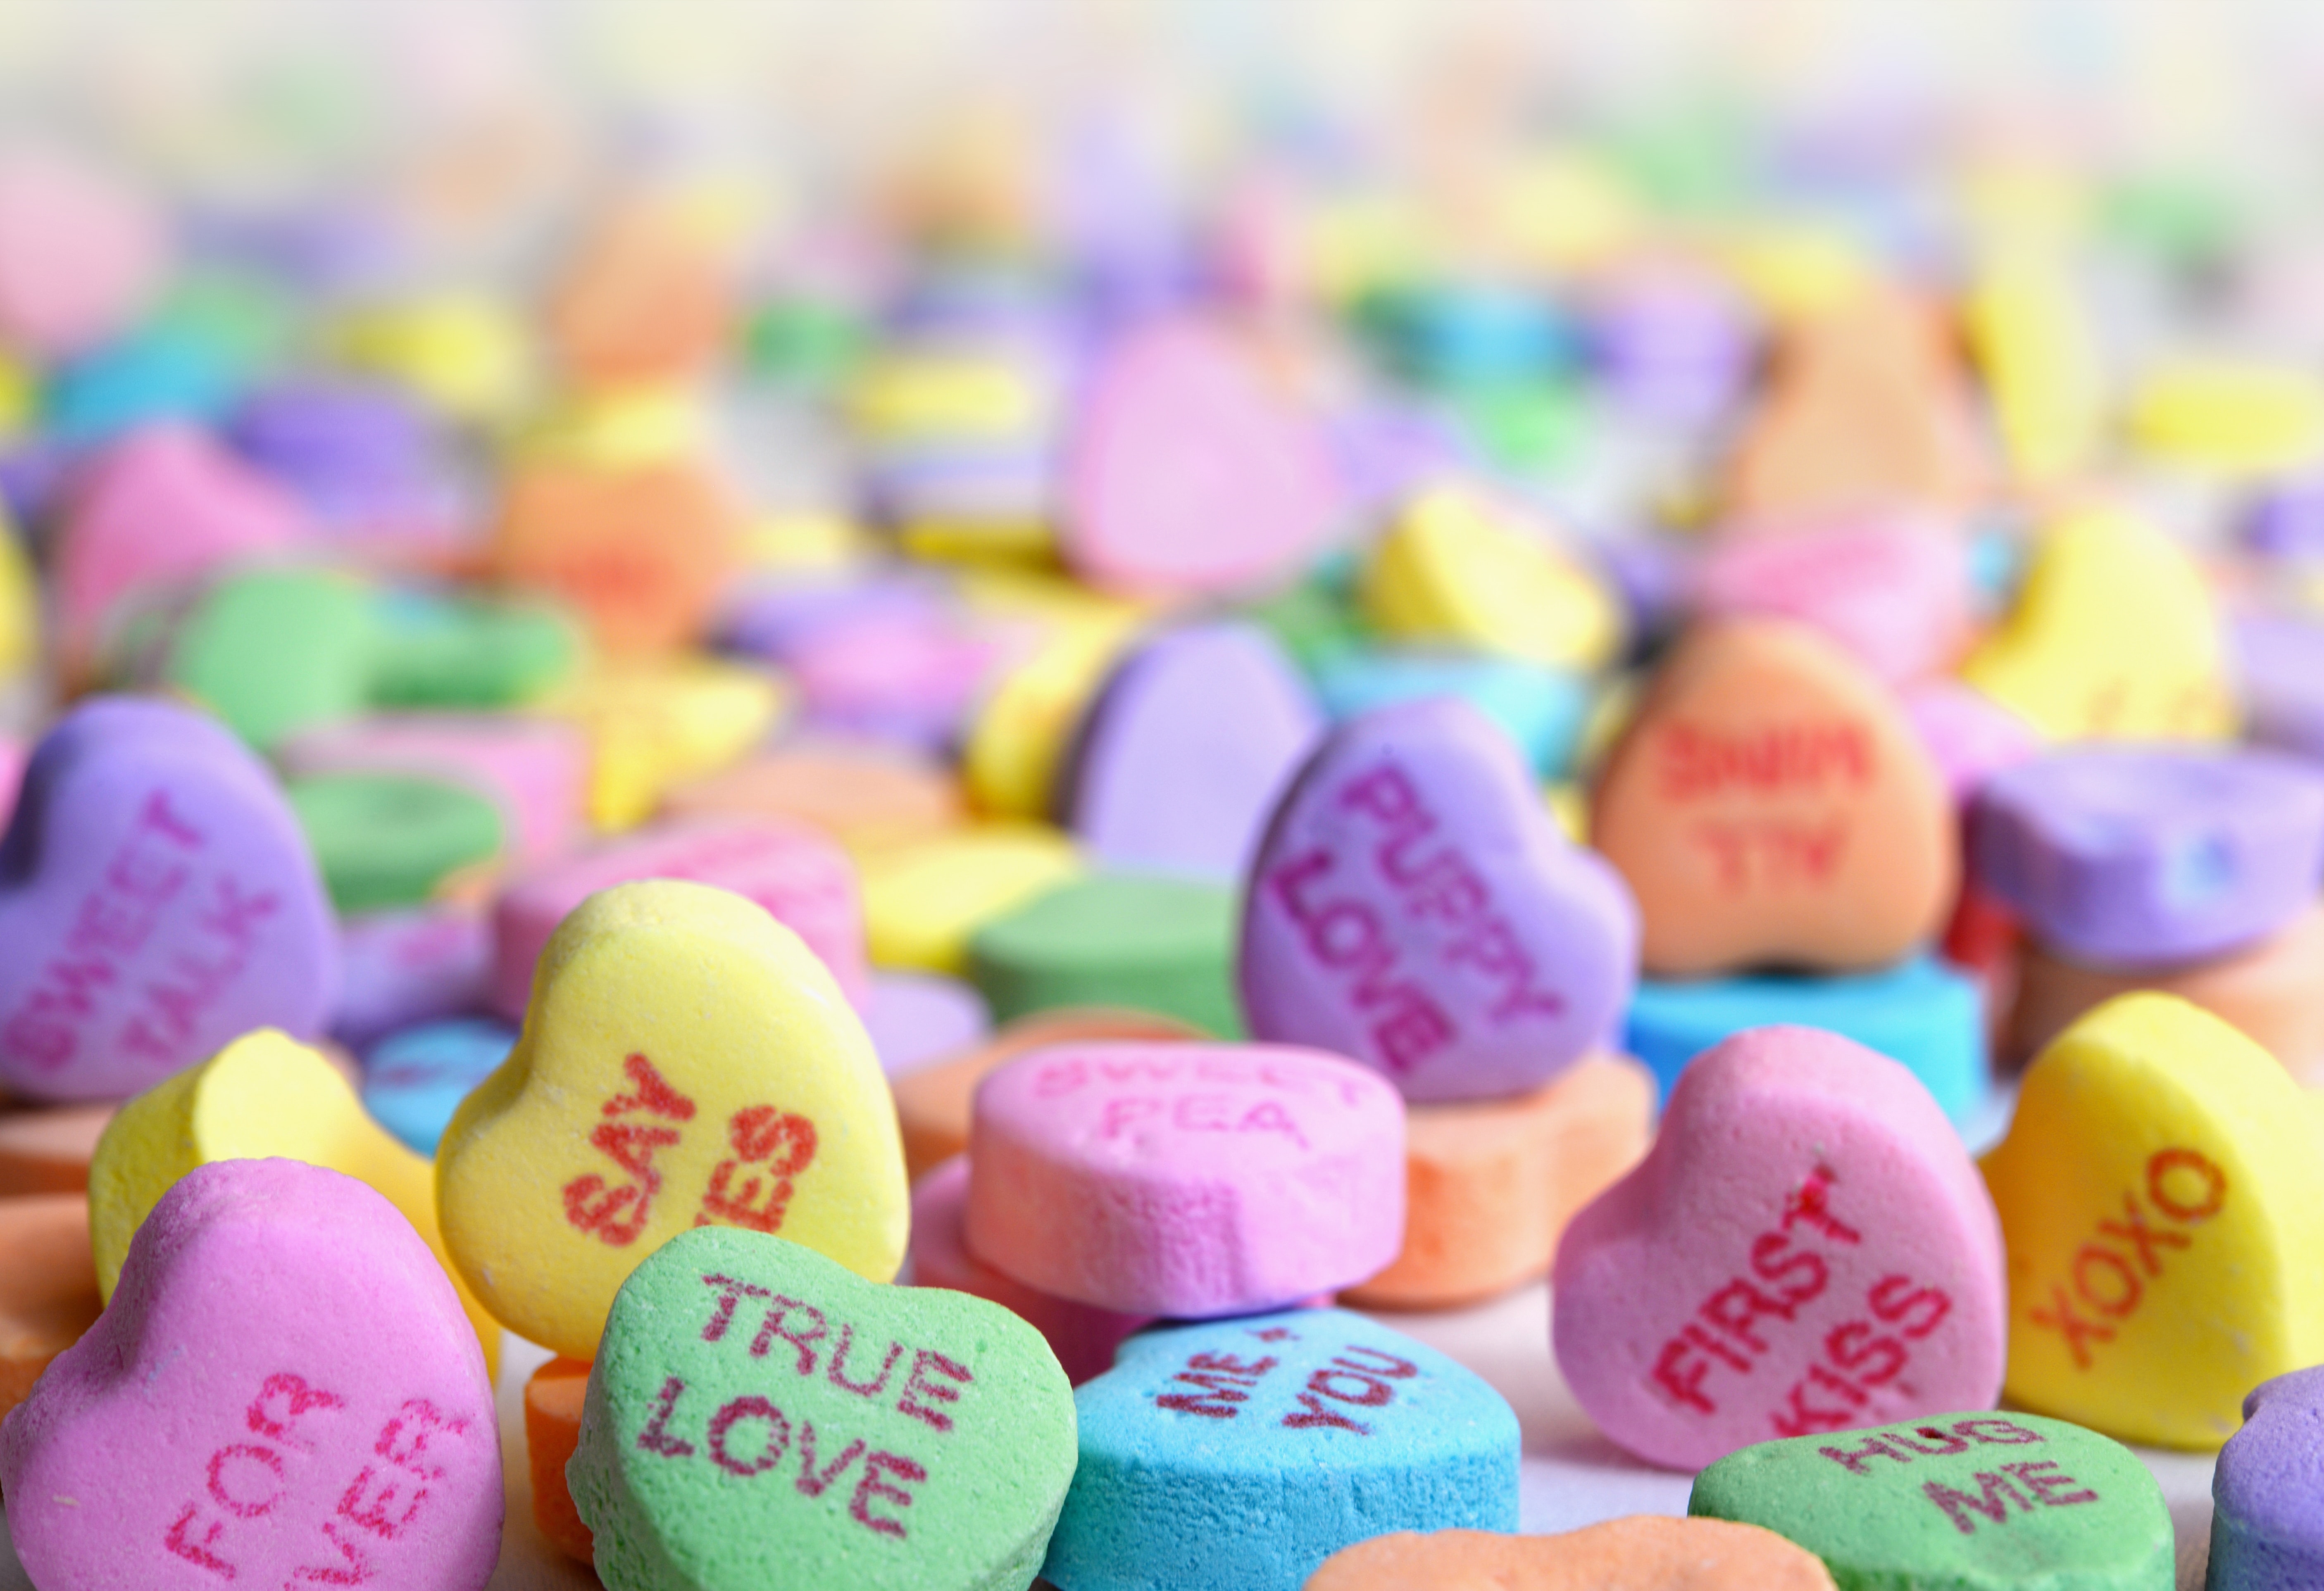 Sweethearts 'Situationship' Candies: A Delightful Twist on Modern Romance - Solange Isaacs.